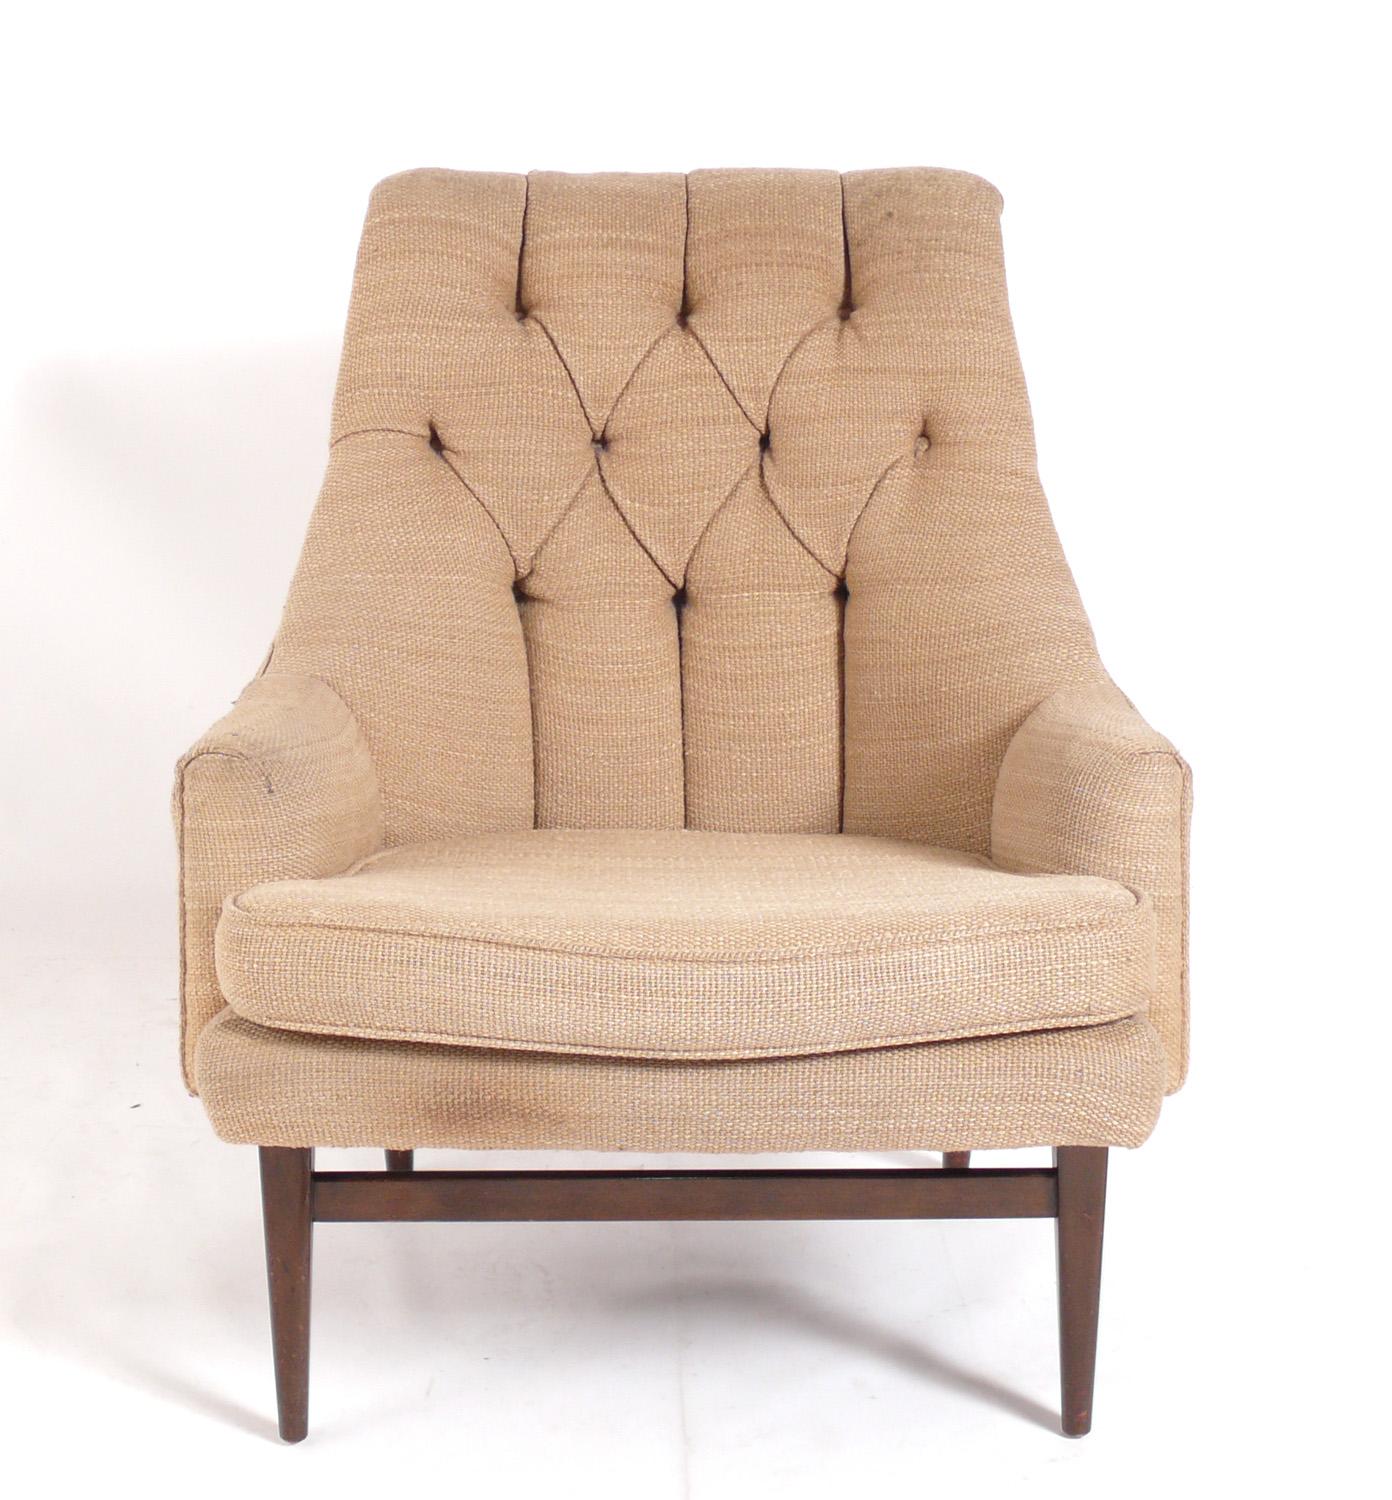 Pair of Curvaceous Mid Century Tufted Lounge Chairs, attributed to Edward Wormley for Dunbar, unsigned, American, circa 1950s. These chairs are currently being refinished and reupholstered and can be completed in your choice of finish color and